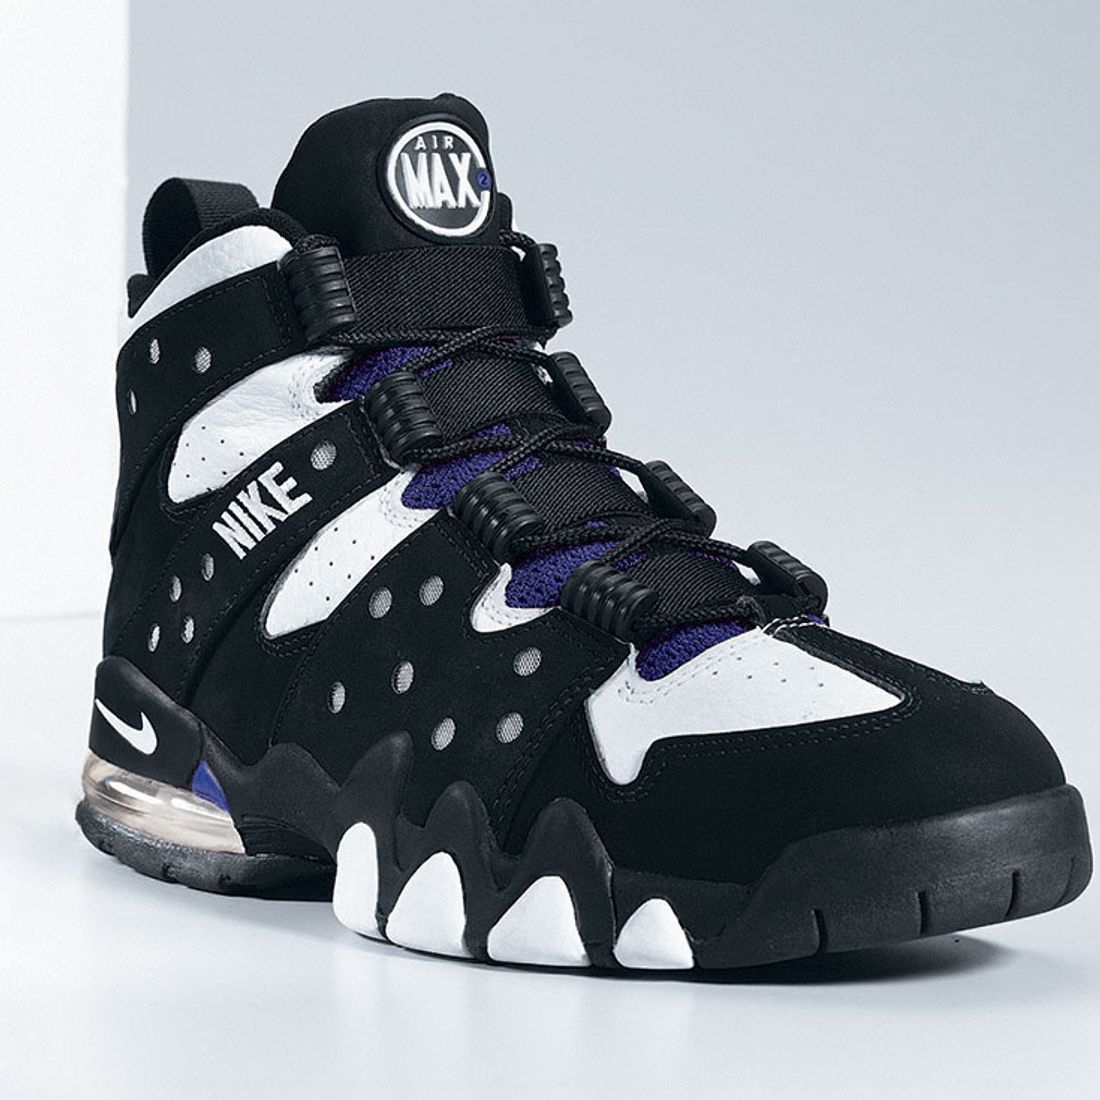 Five Lesser-Known the Nike Air Max CB 94 - Sneaker Freaker